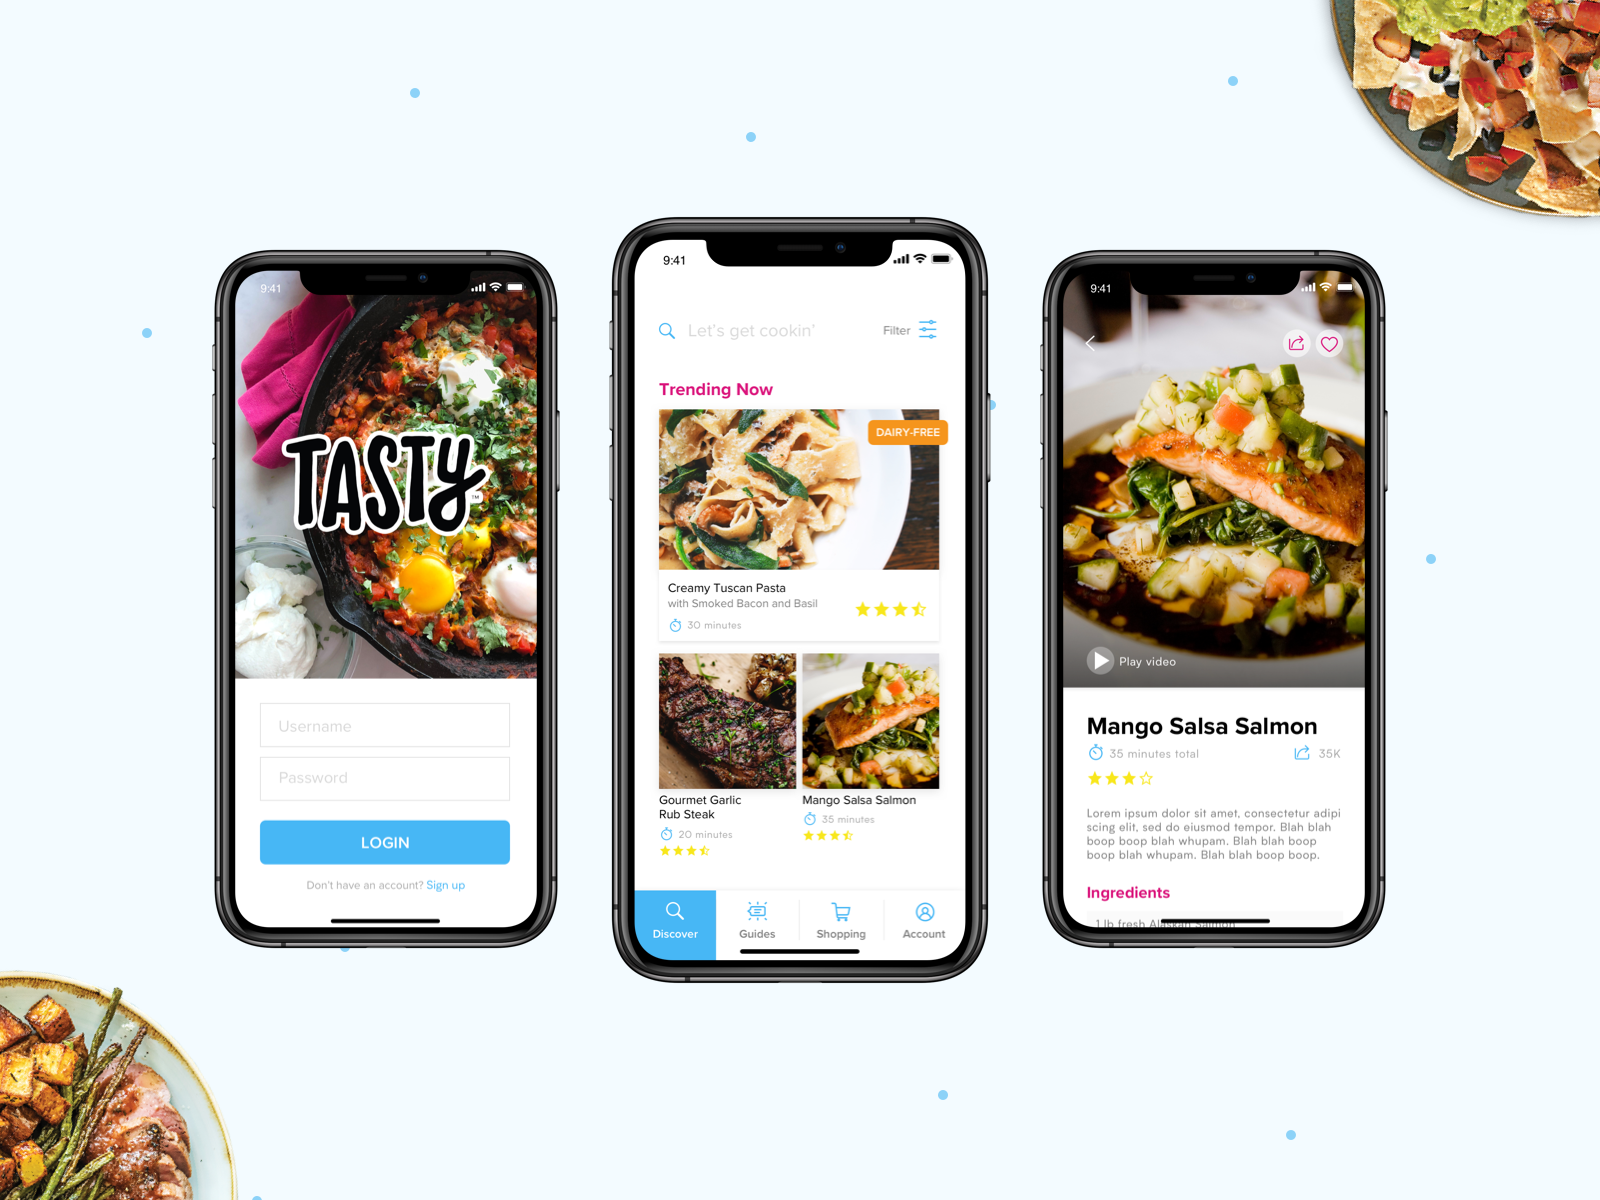 Tasty App Redesign by Monika Cook on Dribbble